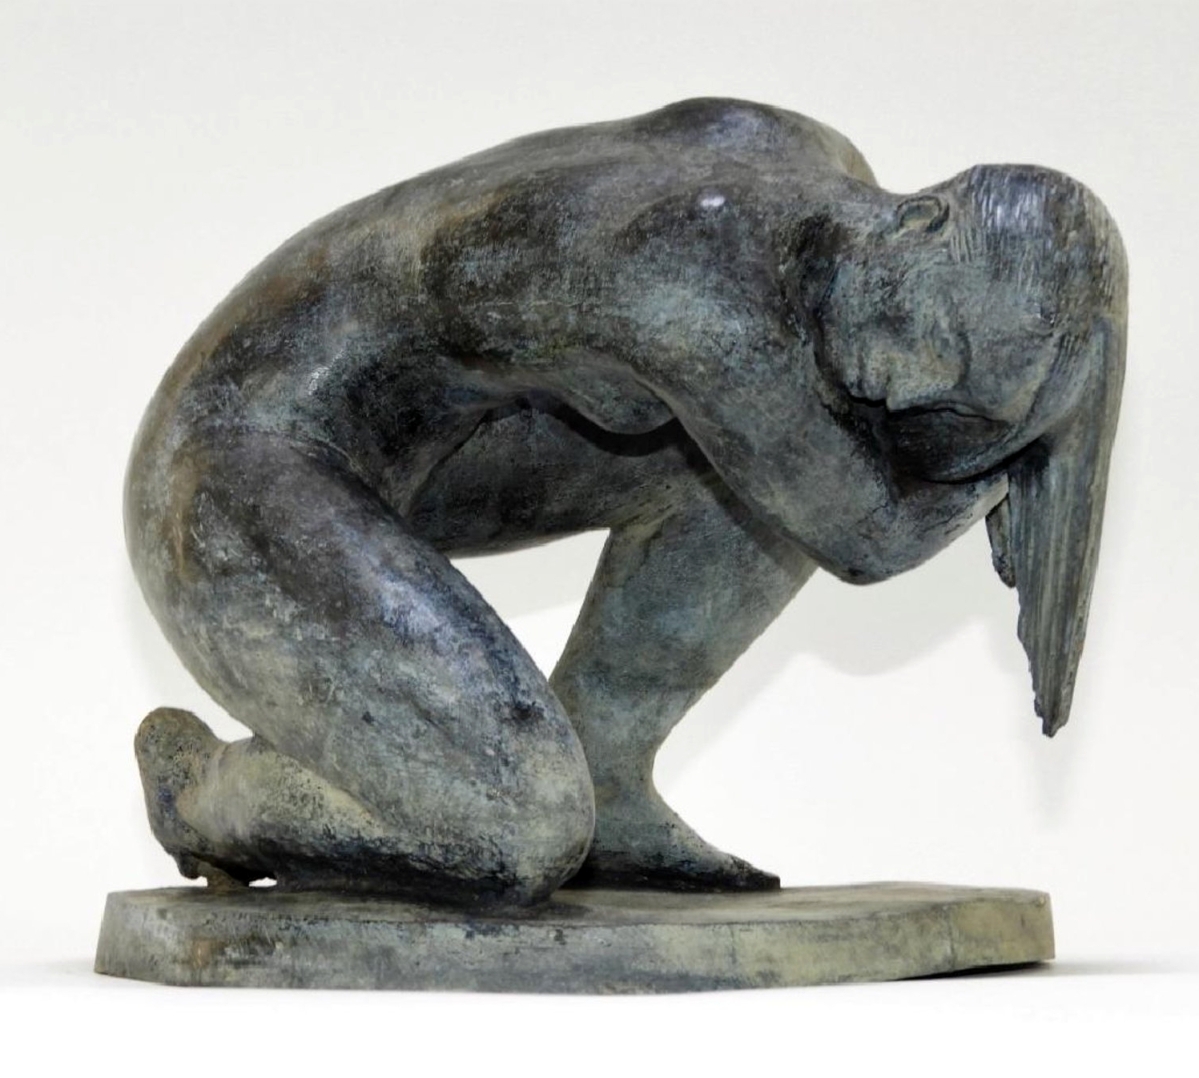 This fine bronze sculpture of a female nude bather was created by Mexican born artist Enrique Alferez (1901–1999). The sculpture measures 8¼ by 9 inches wide at the base; it was signed on the base “E. Alferez” and achieved $13,750.